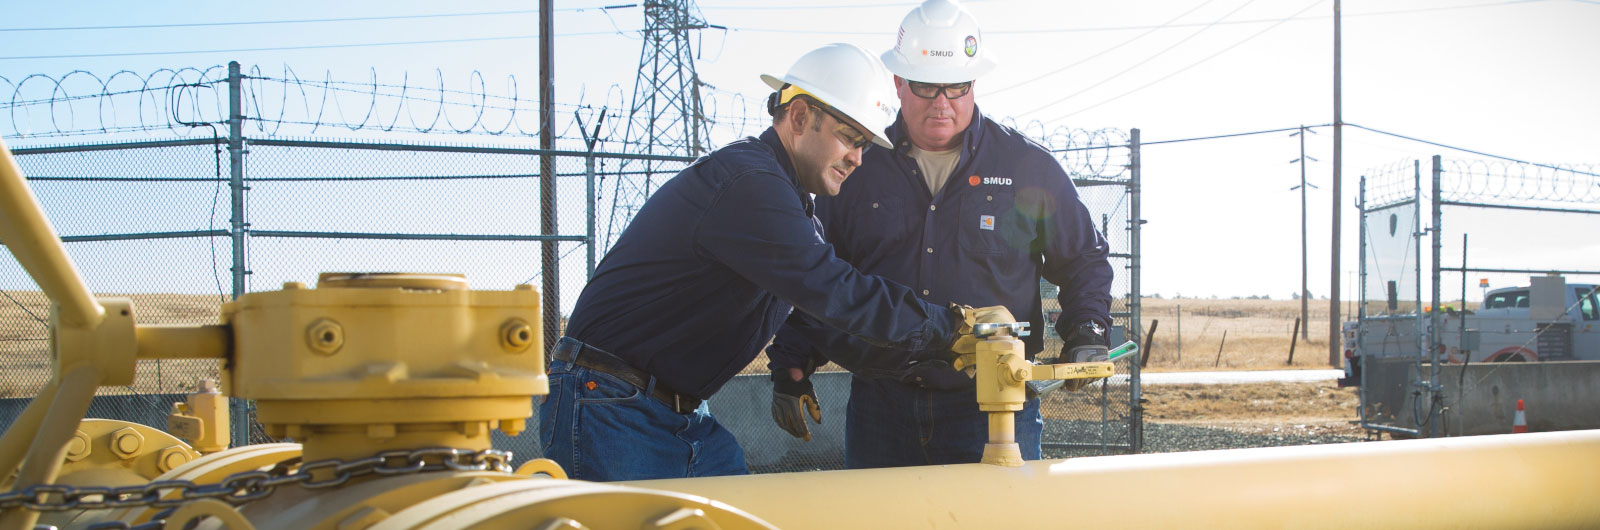 Two employees work on gas pipeline